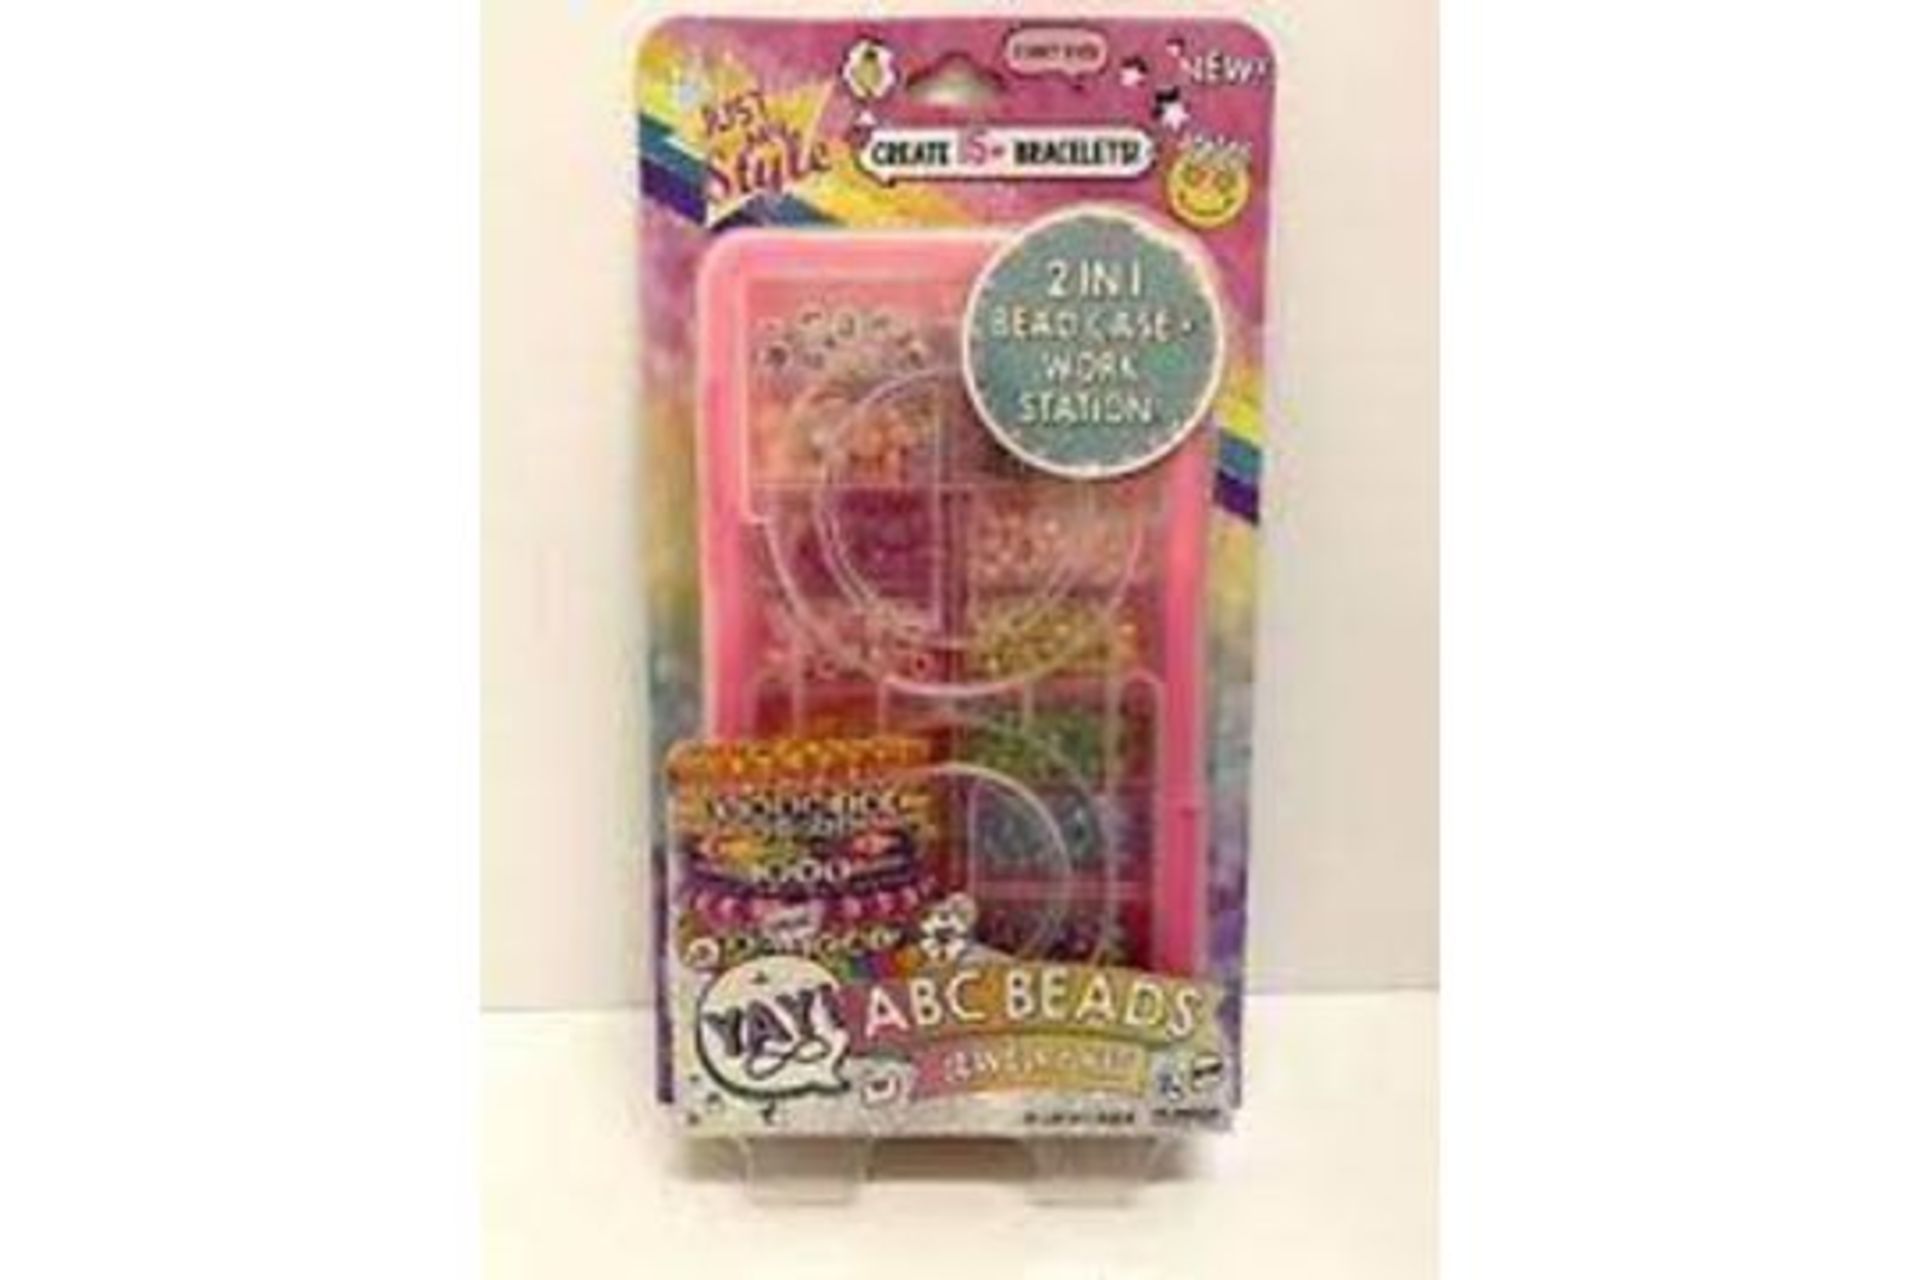 36 X BRAND NEW ABC JUST MY STYLE 2 IN 1 BEAD CASES R15-10 - Image 2 of 2